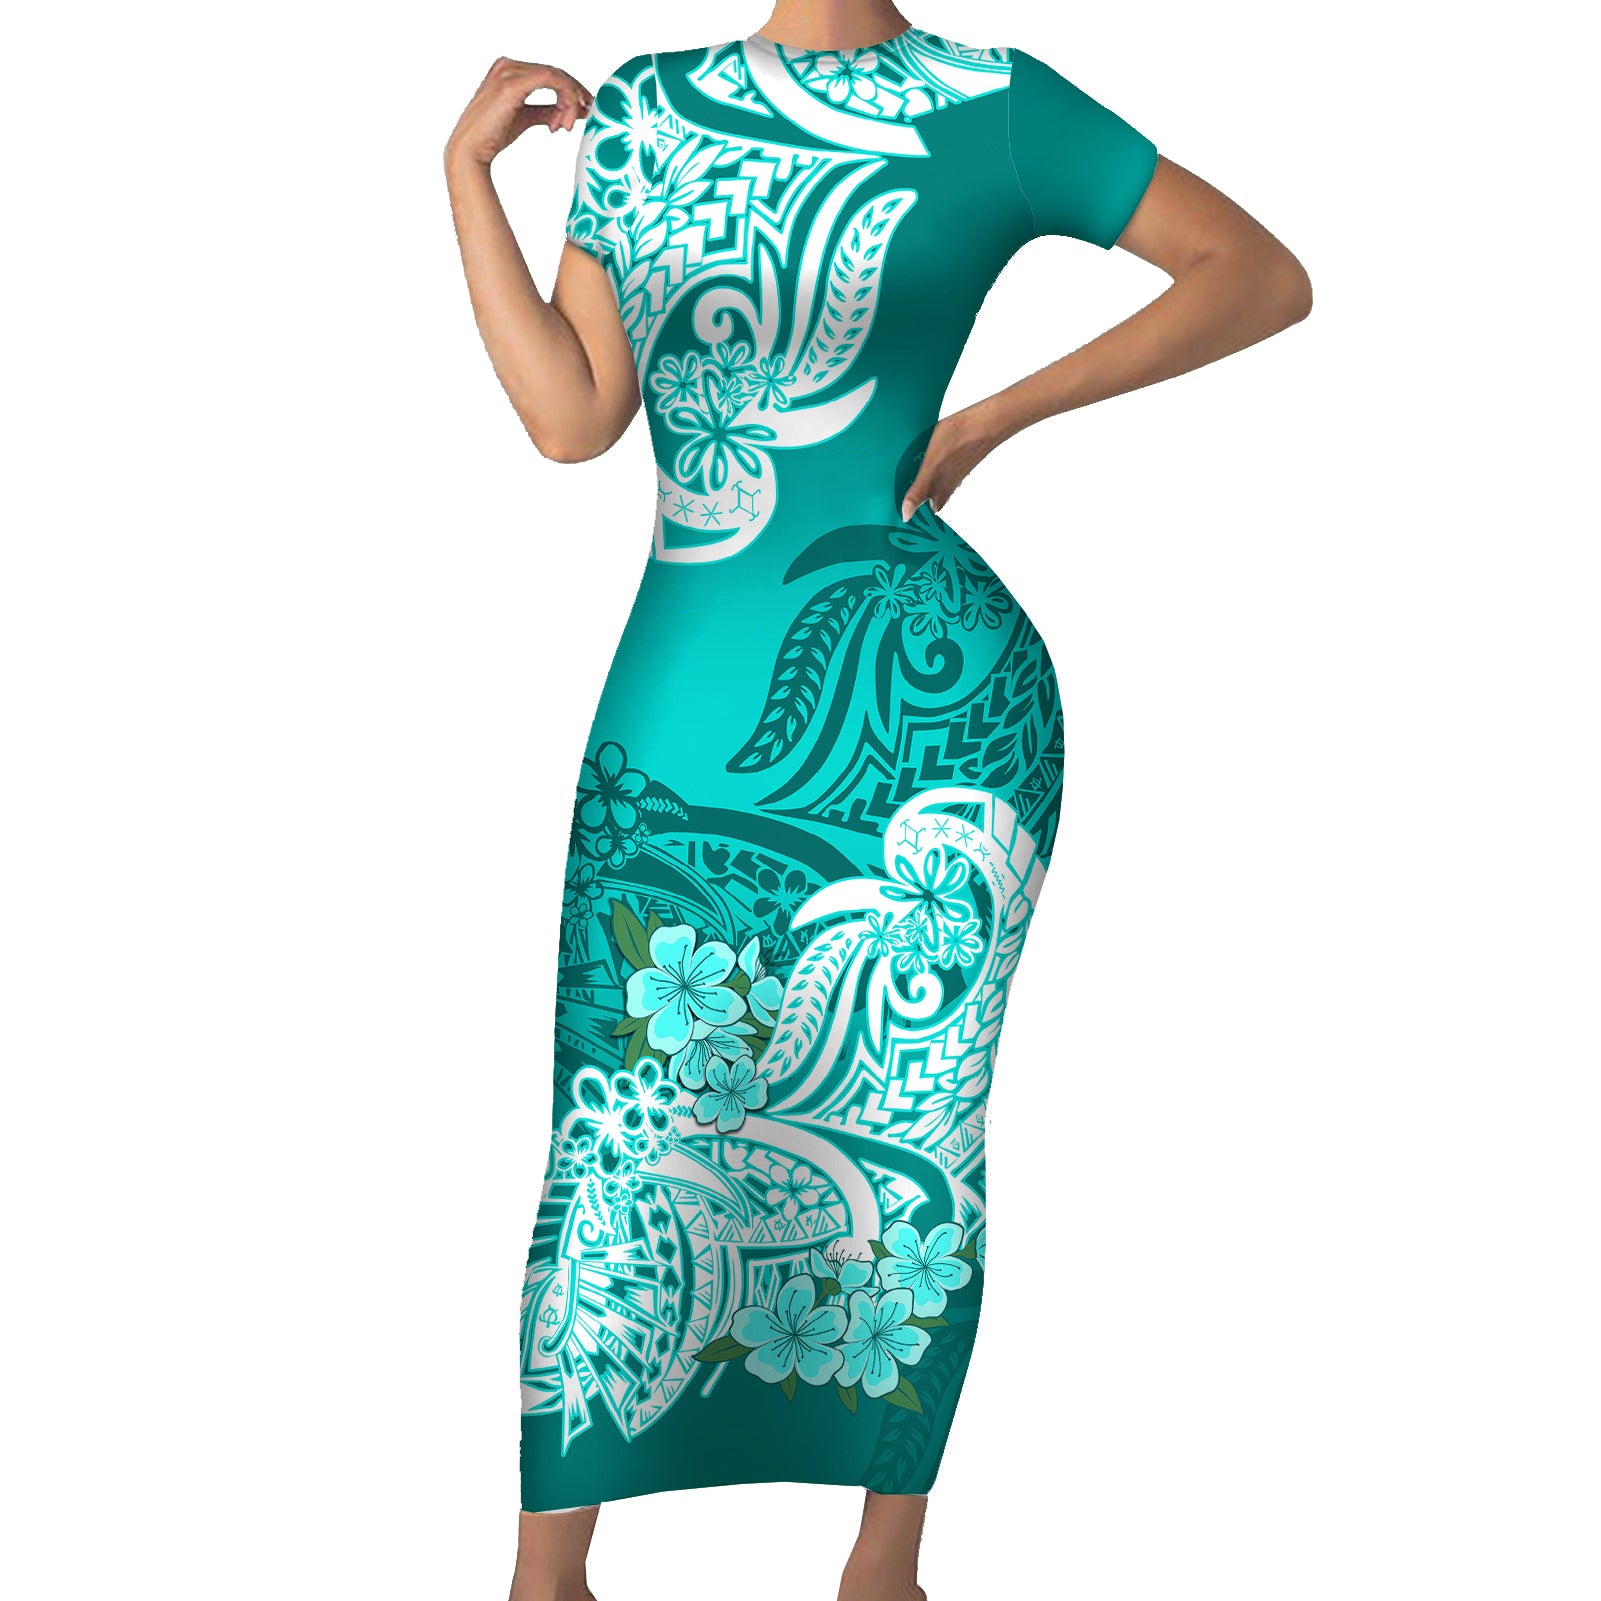 Polynesian Short Sleeve Bodycon Dress Pacific Flower Mix Floral Tribal Tattoo Turquoise Vibe LT9 Long Dress Turquoise - Polynesian Pride